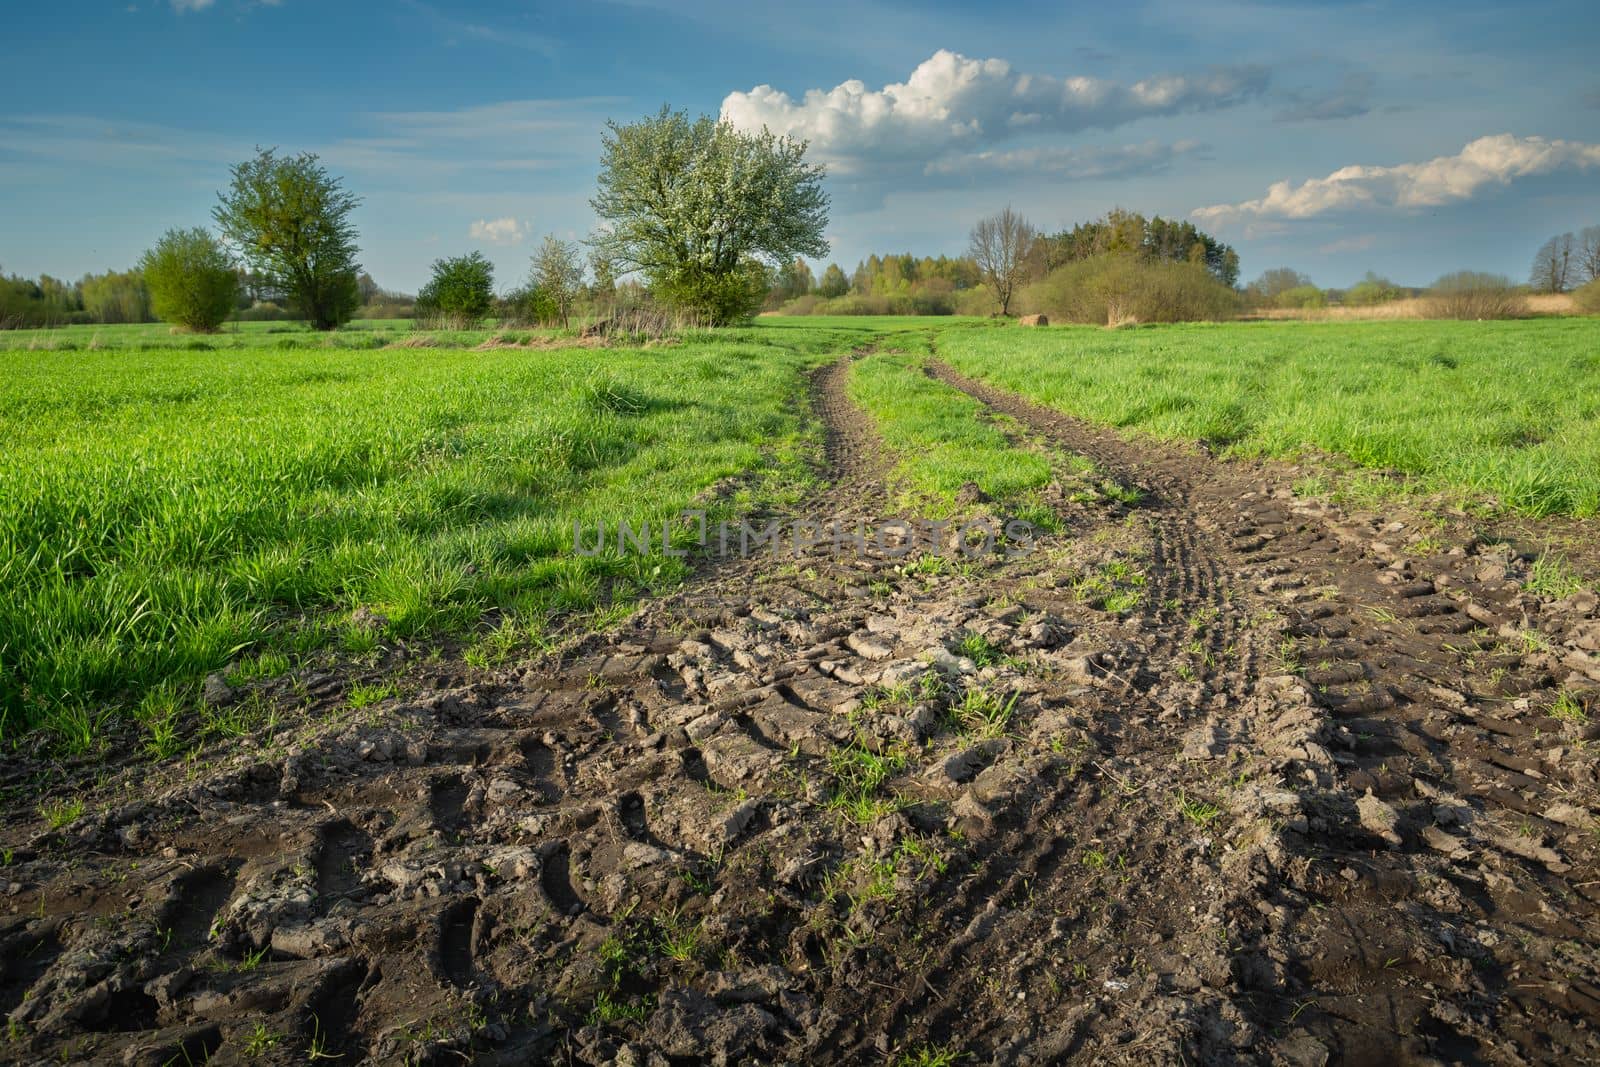 View of the muddy road and green meadows in spring by darekb22